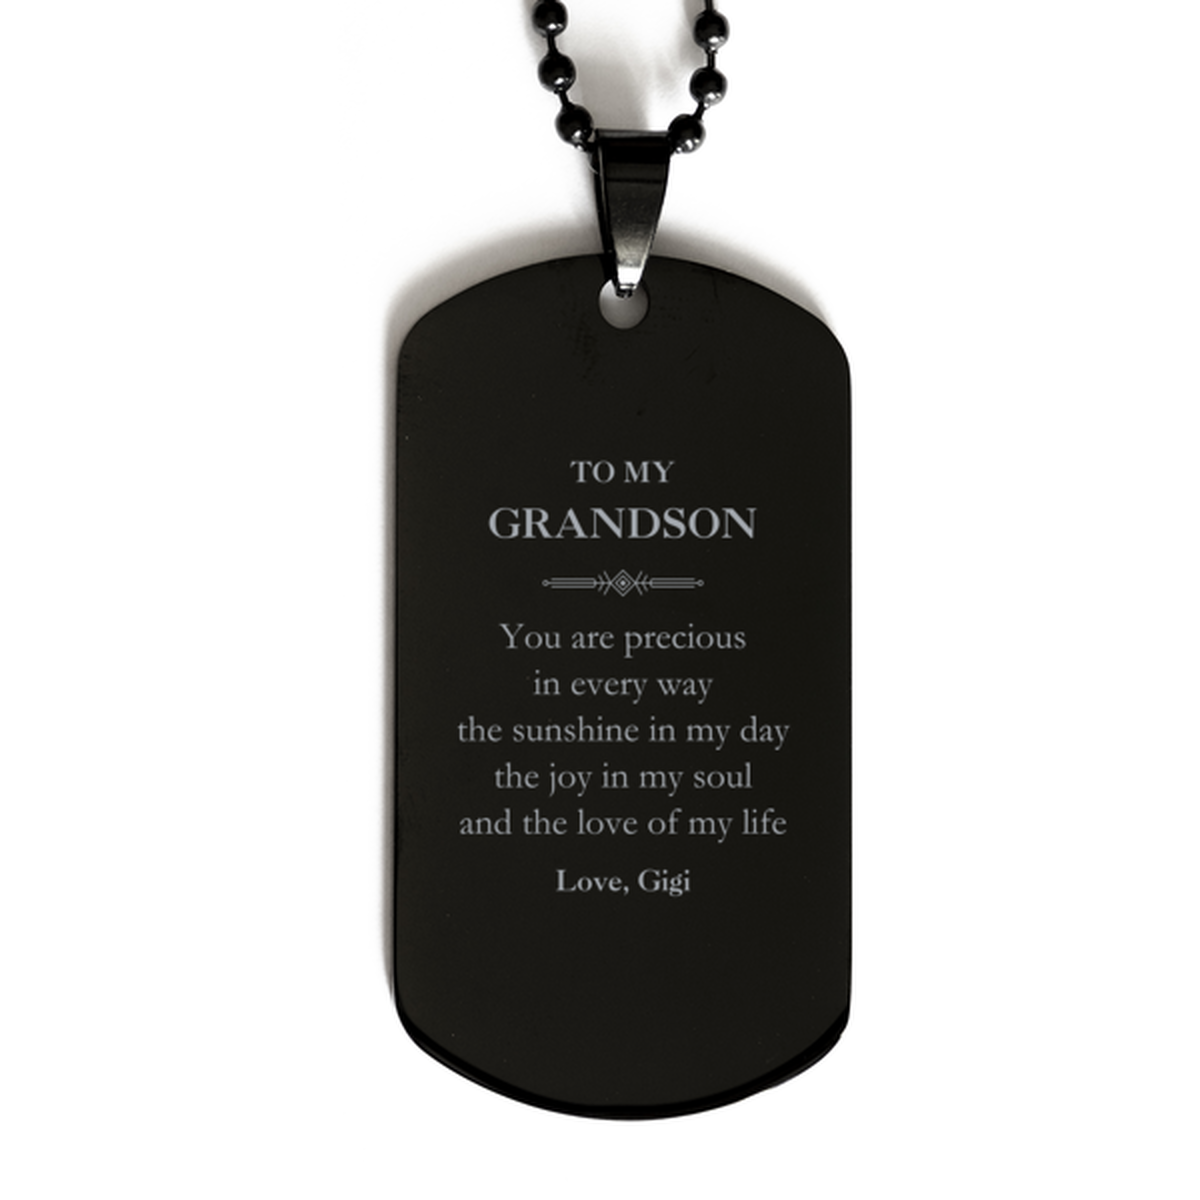 Graduation Gifts for Grandson Black Dog Tag Present from Gigi, Christmas Grandson Birthday Gifts Grandson You are precious in every way the sunshine in my day. Love, Gigi